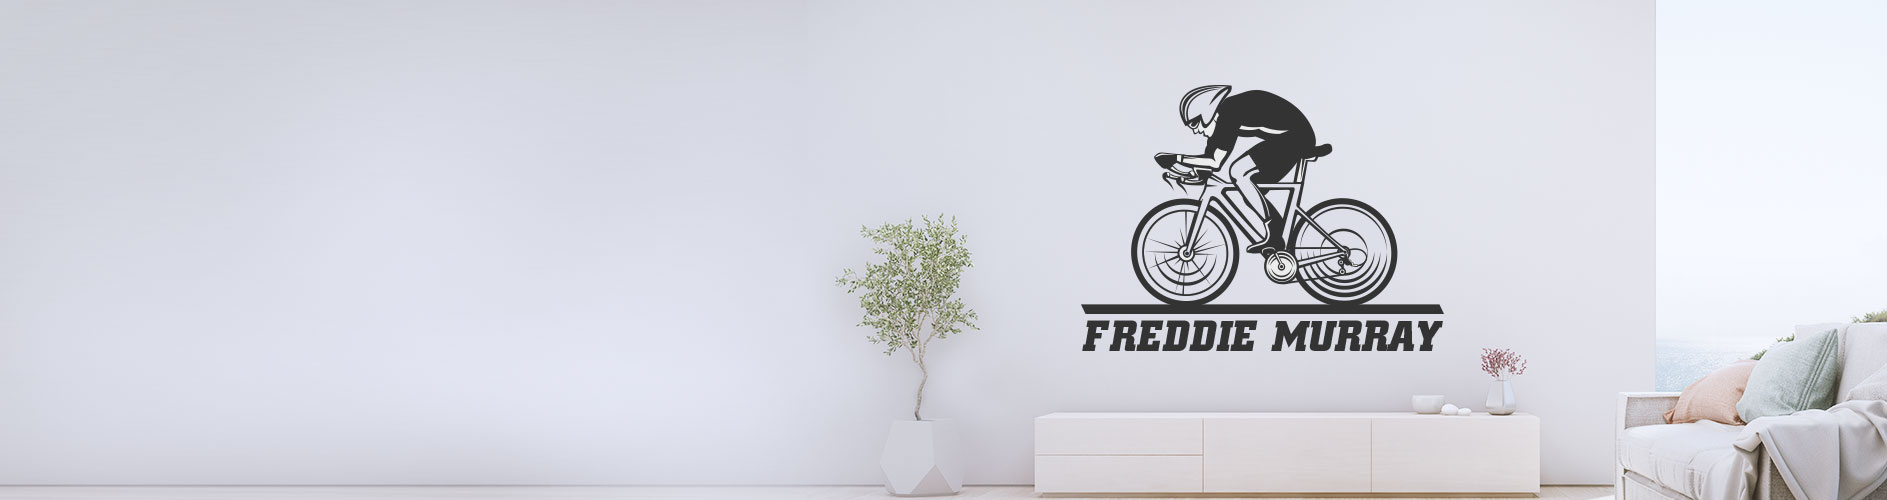 Wall Art Stickers & Decals